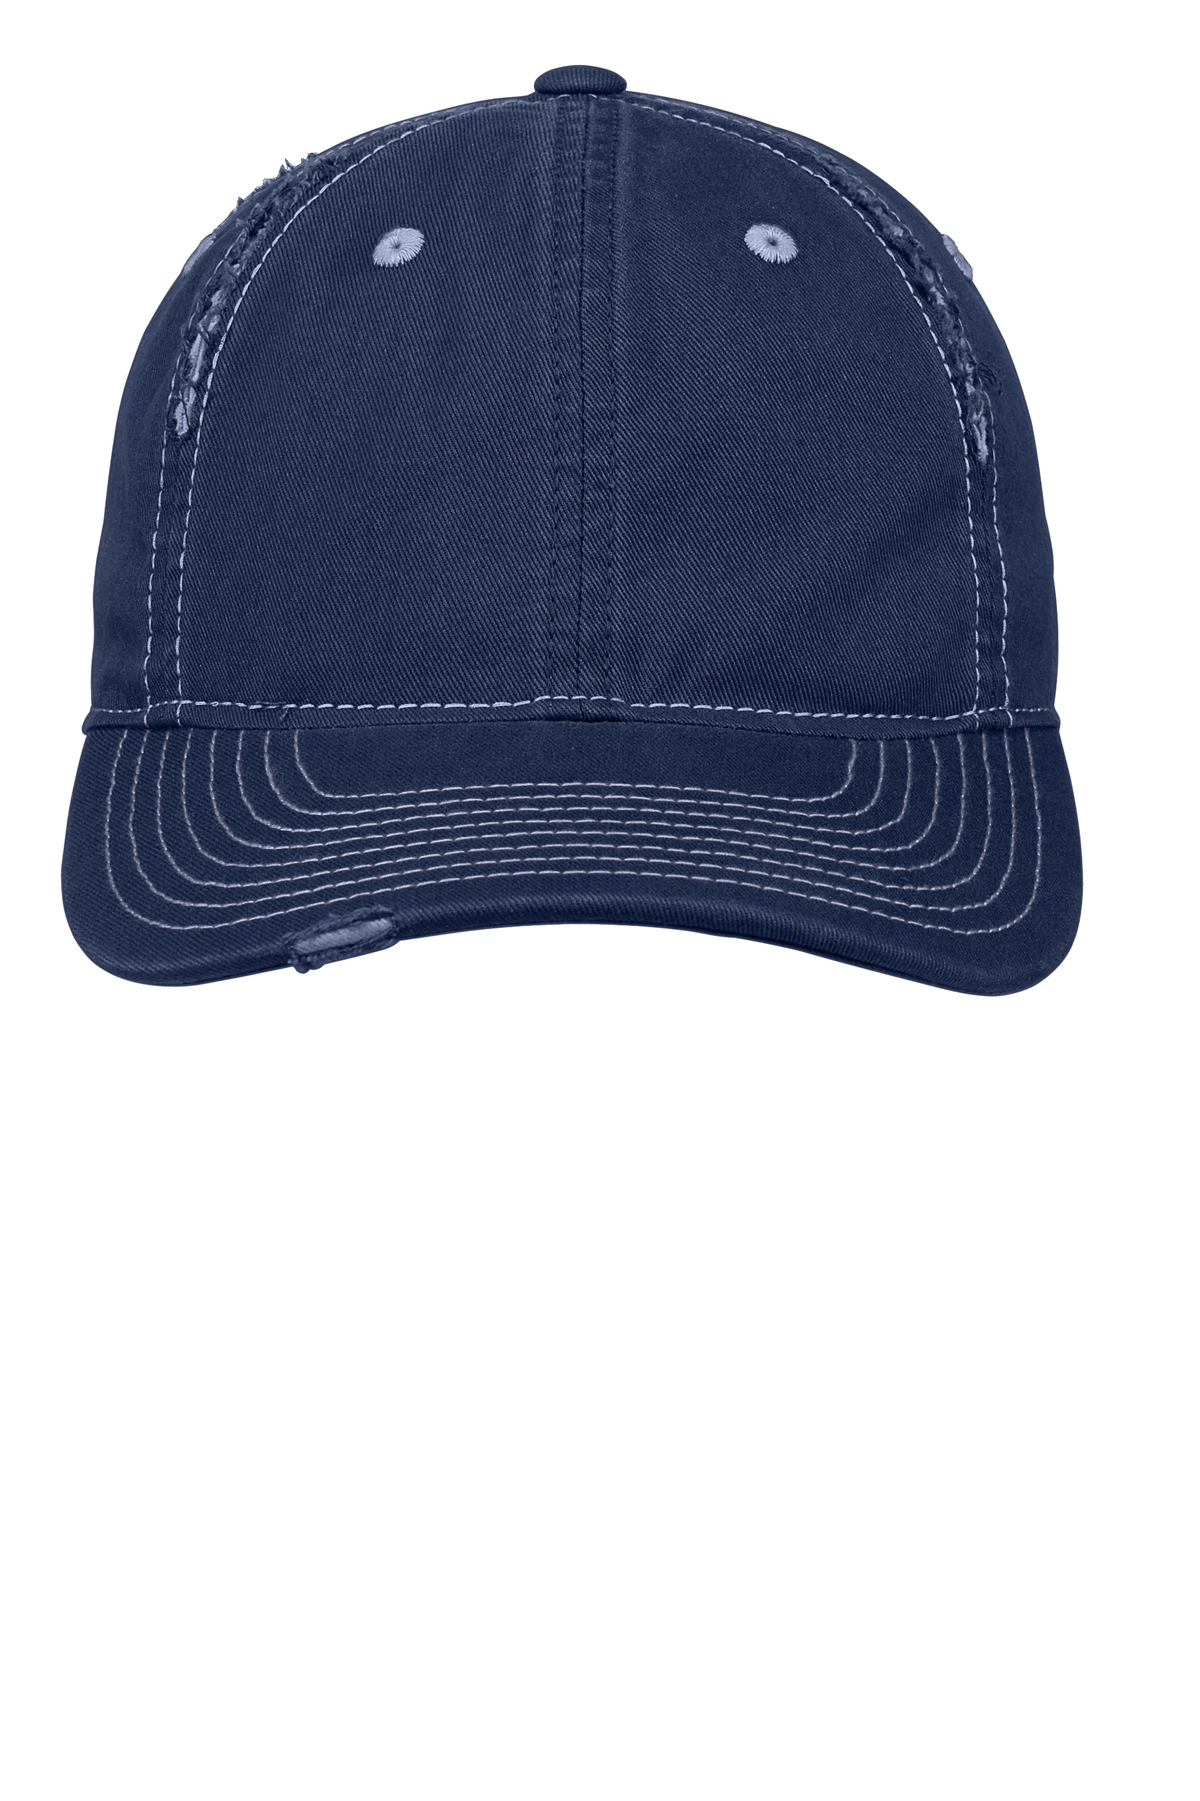 District Rip and Distressed Cap | Product | SanMar